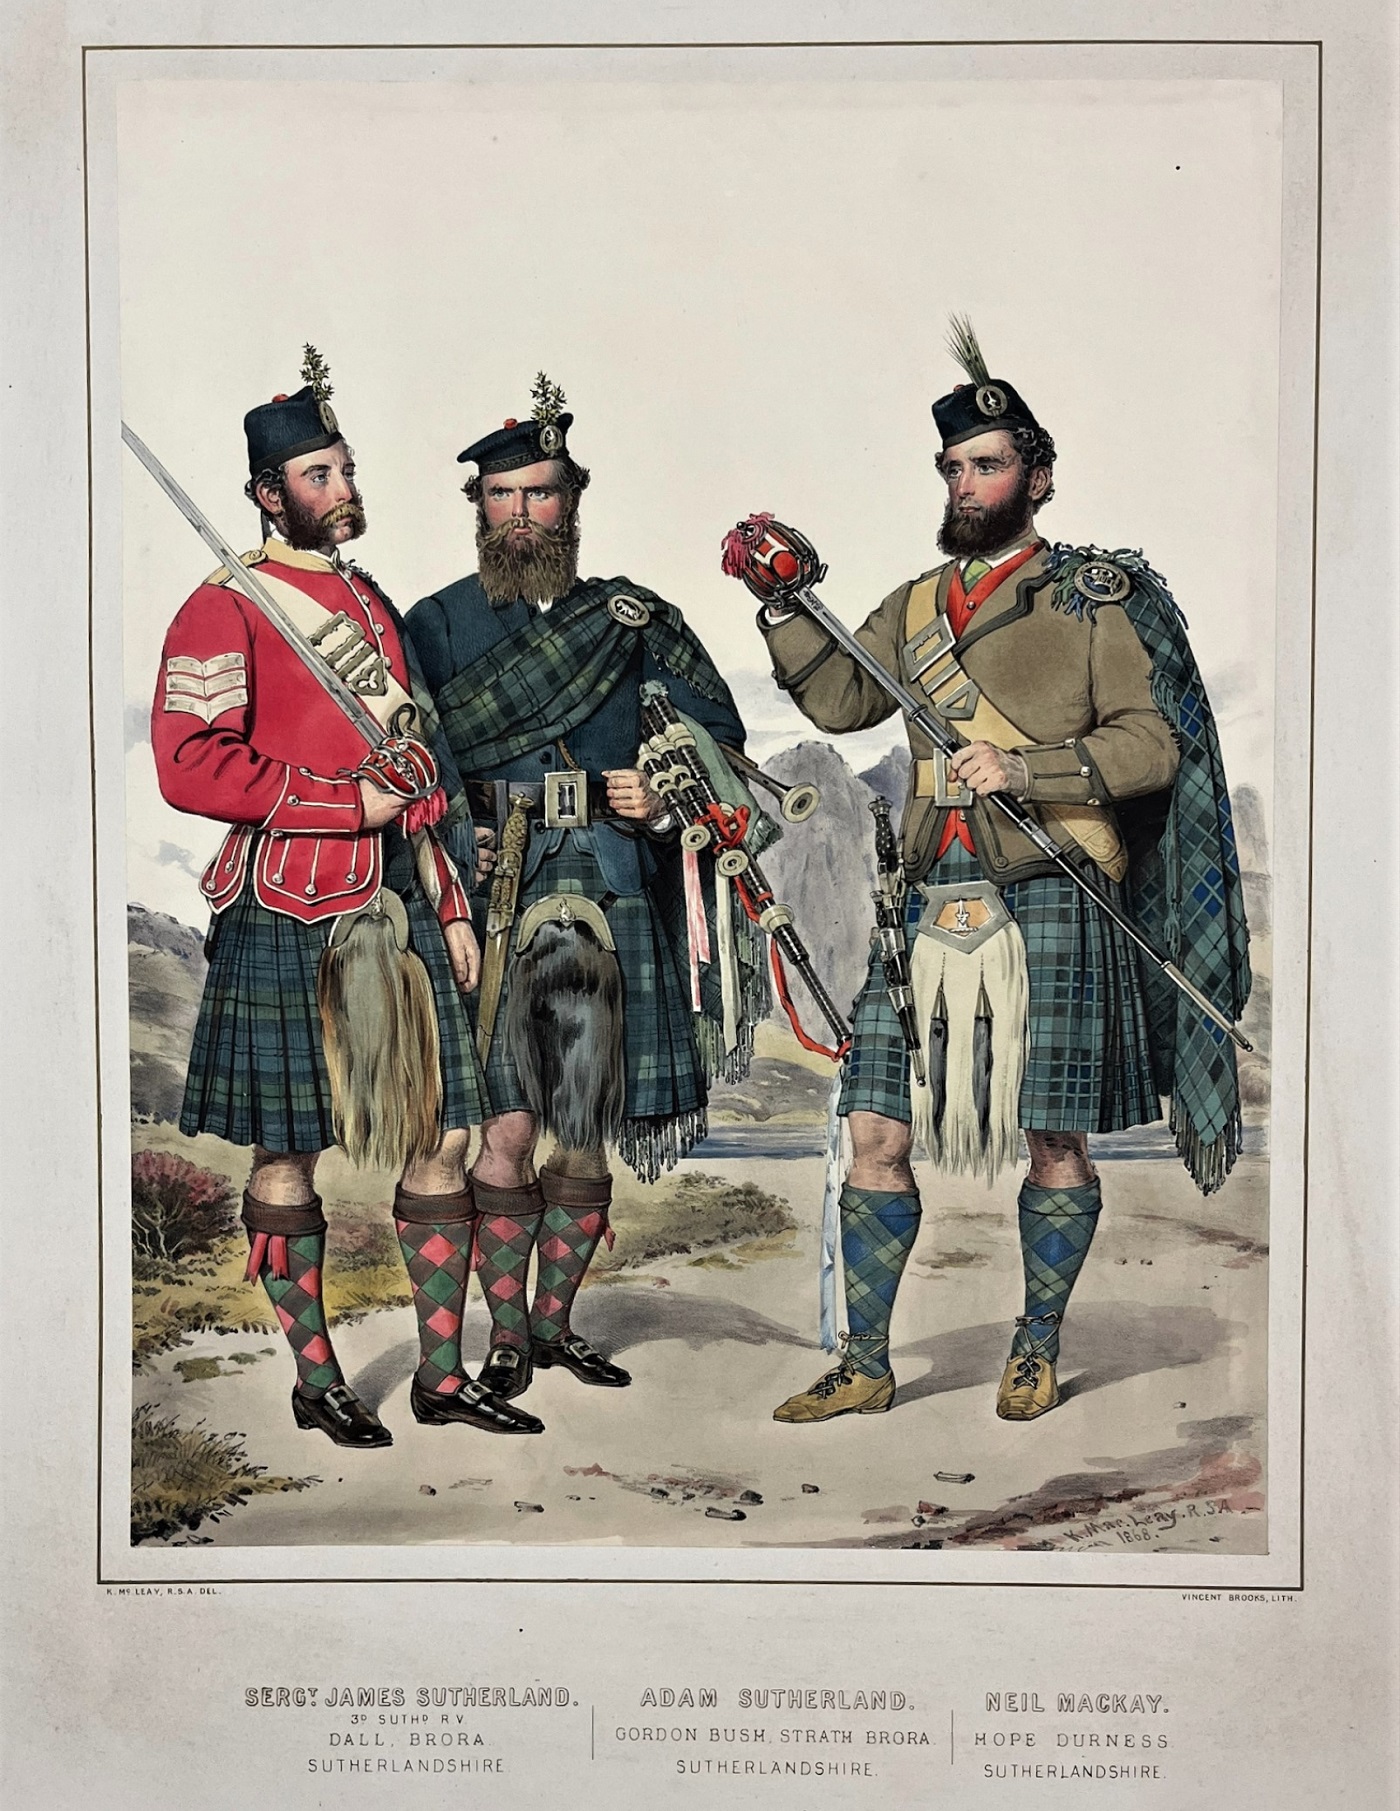 Illustration in a book showing three men, all with bushy beards, holding swords and dressed in head to toe Highland Dress with military jackets.